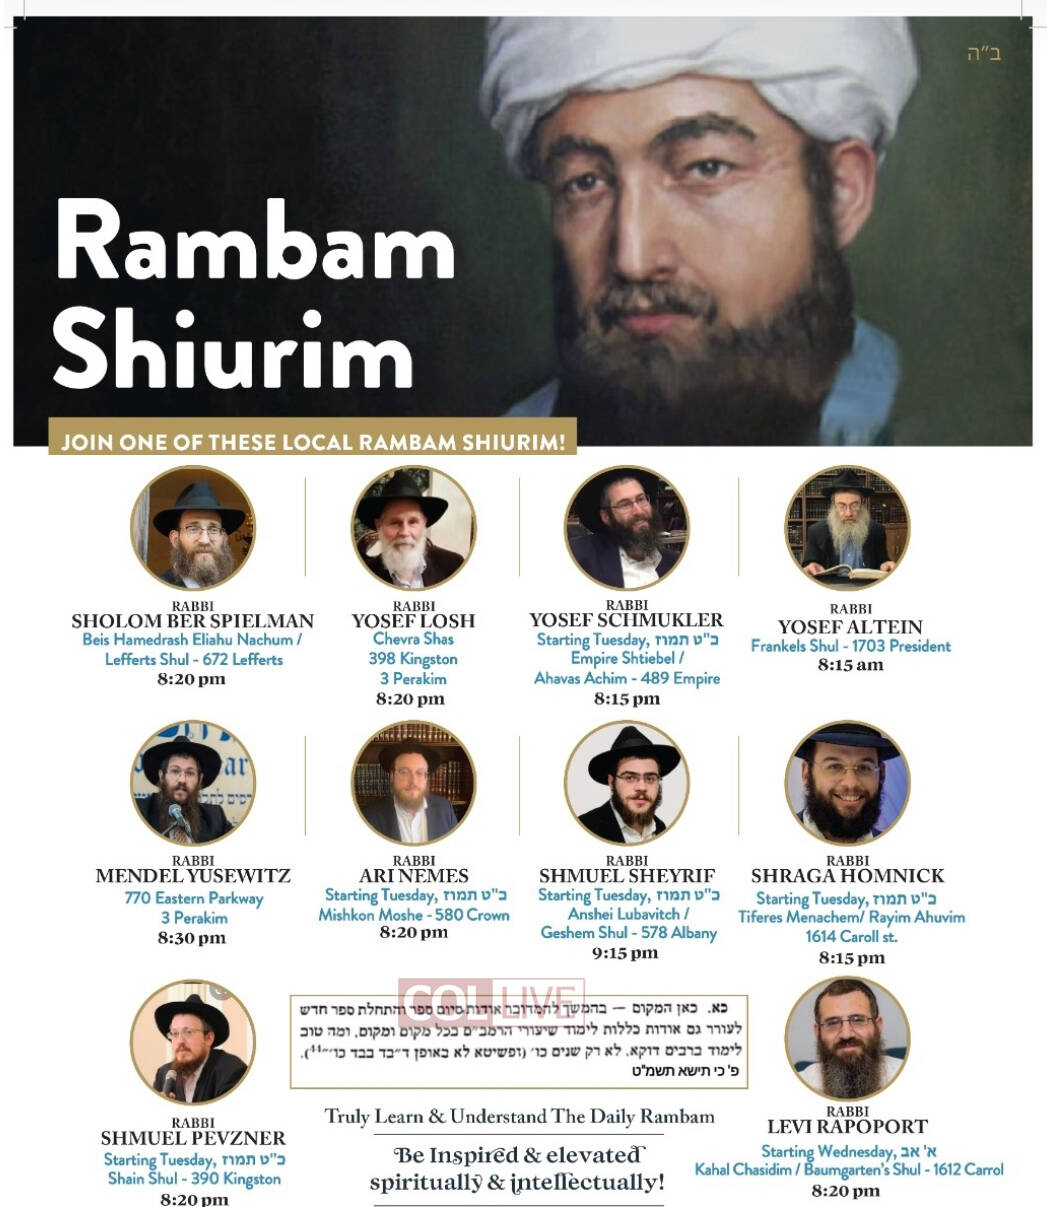 Daily Rambam Shiurim Launch Today Throughout Crown Heights